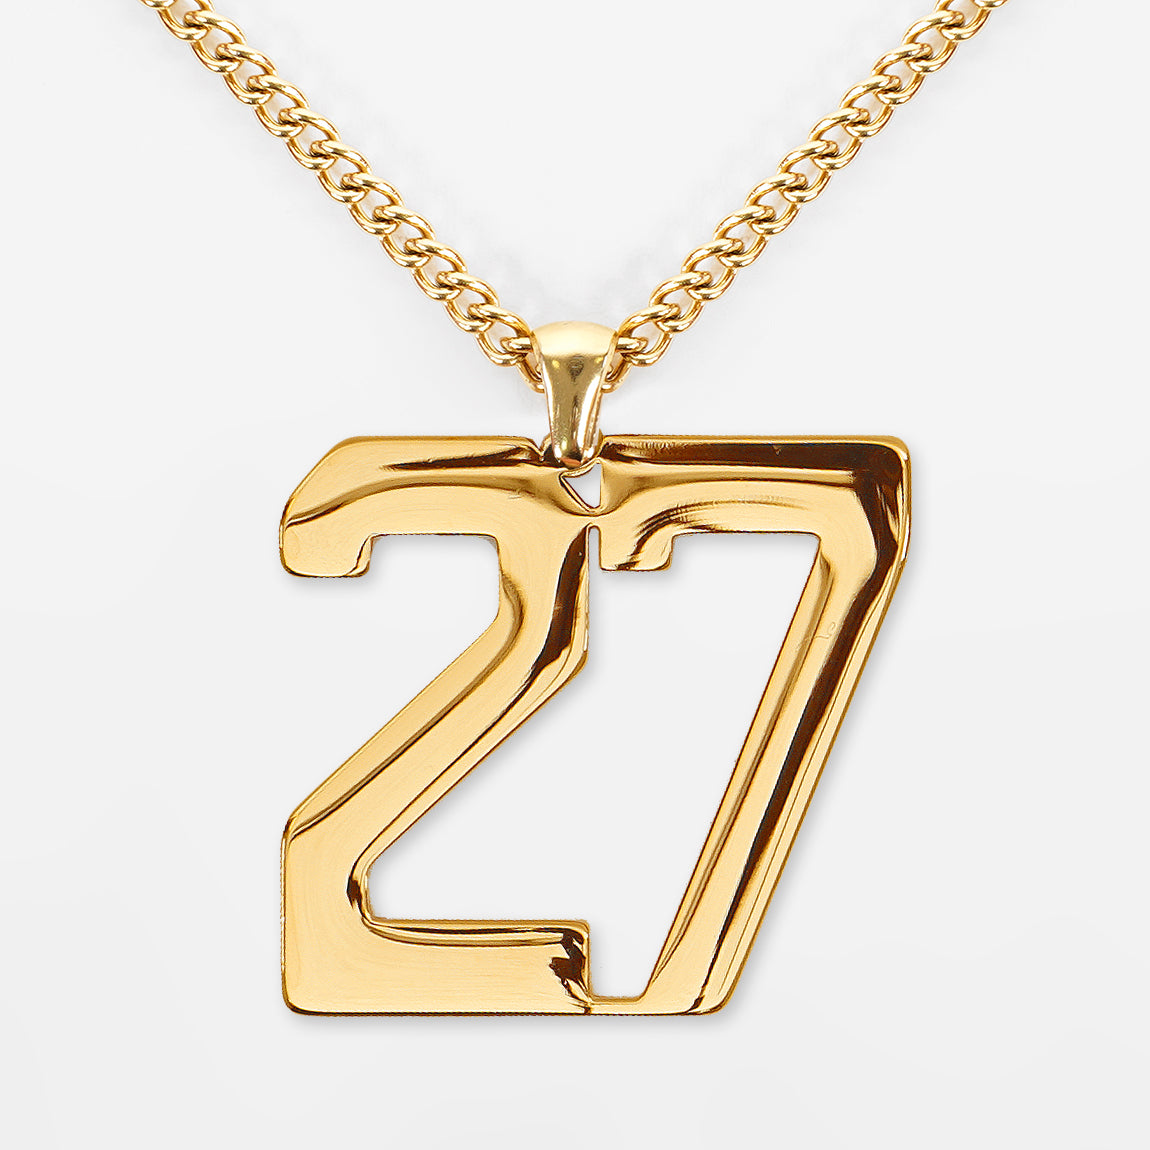 27 Number Pendant with Chain Necklace - Gold Plated Stainless Steel